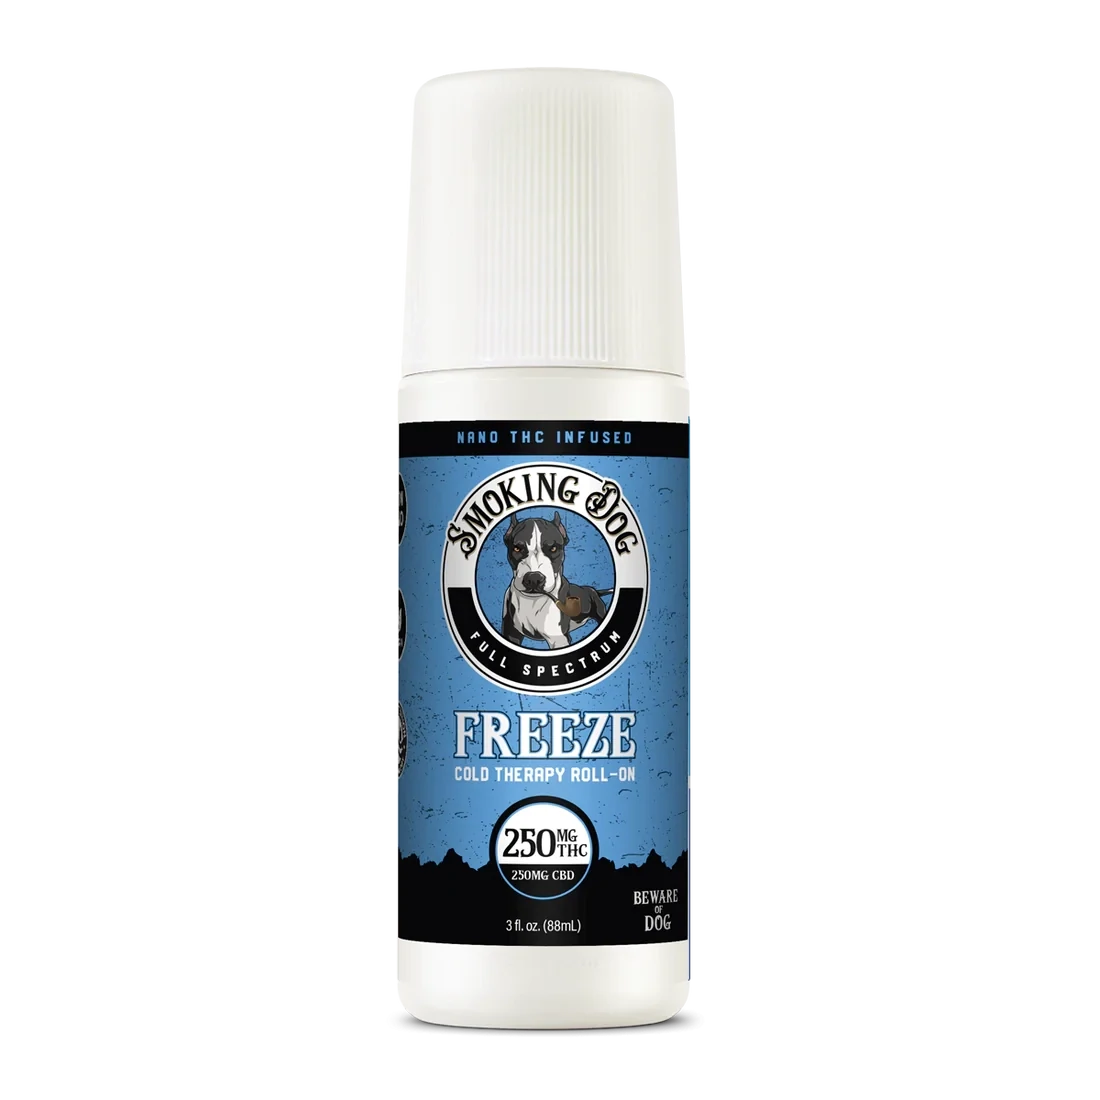 THC Infused Freeze Roll-on 1:1 (250 D9: 250mg CBD)